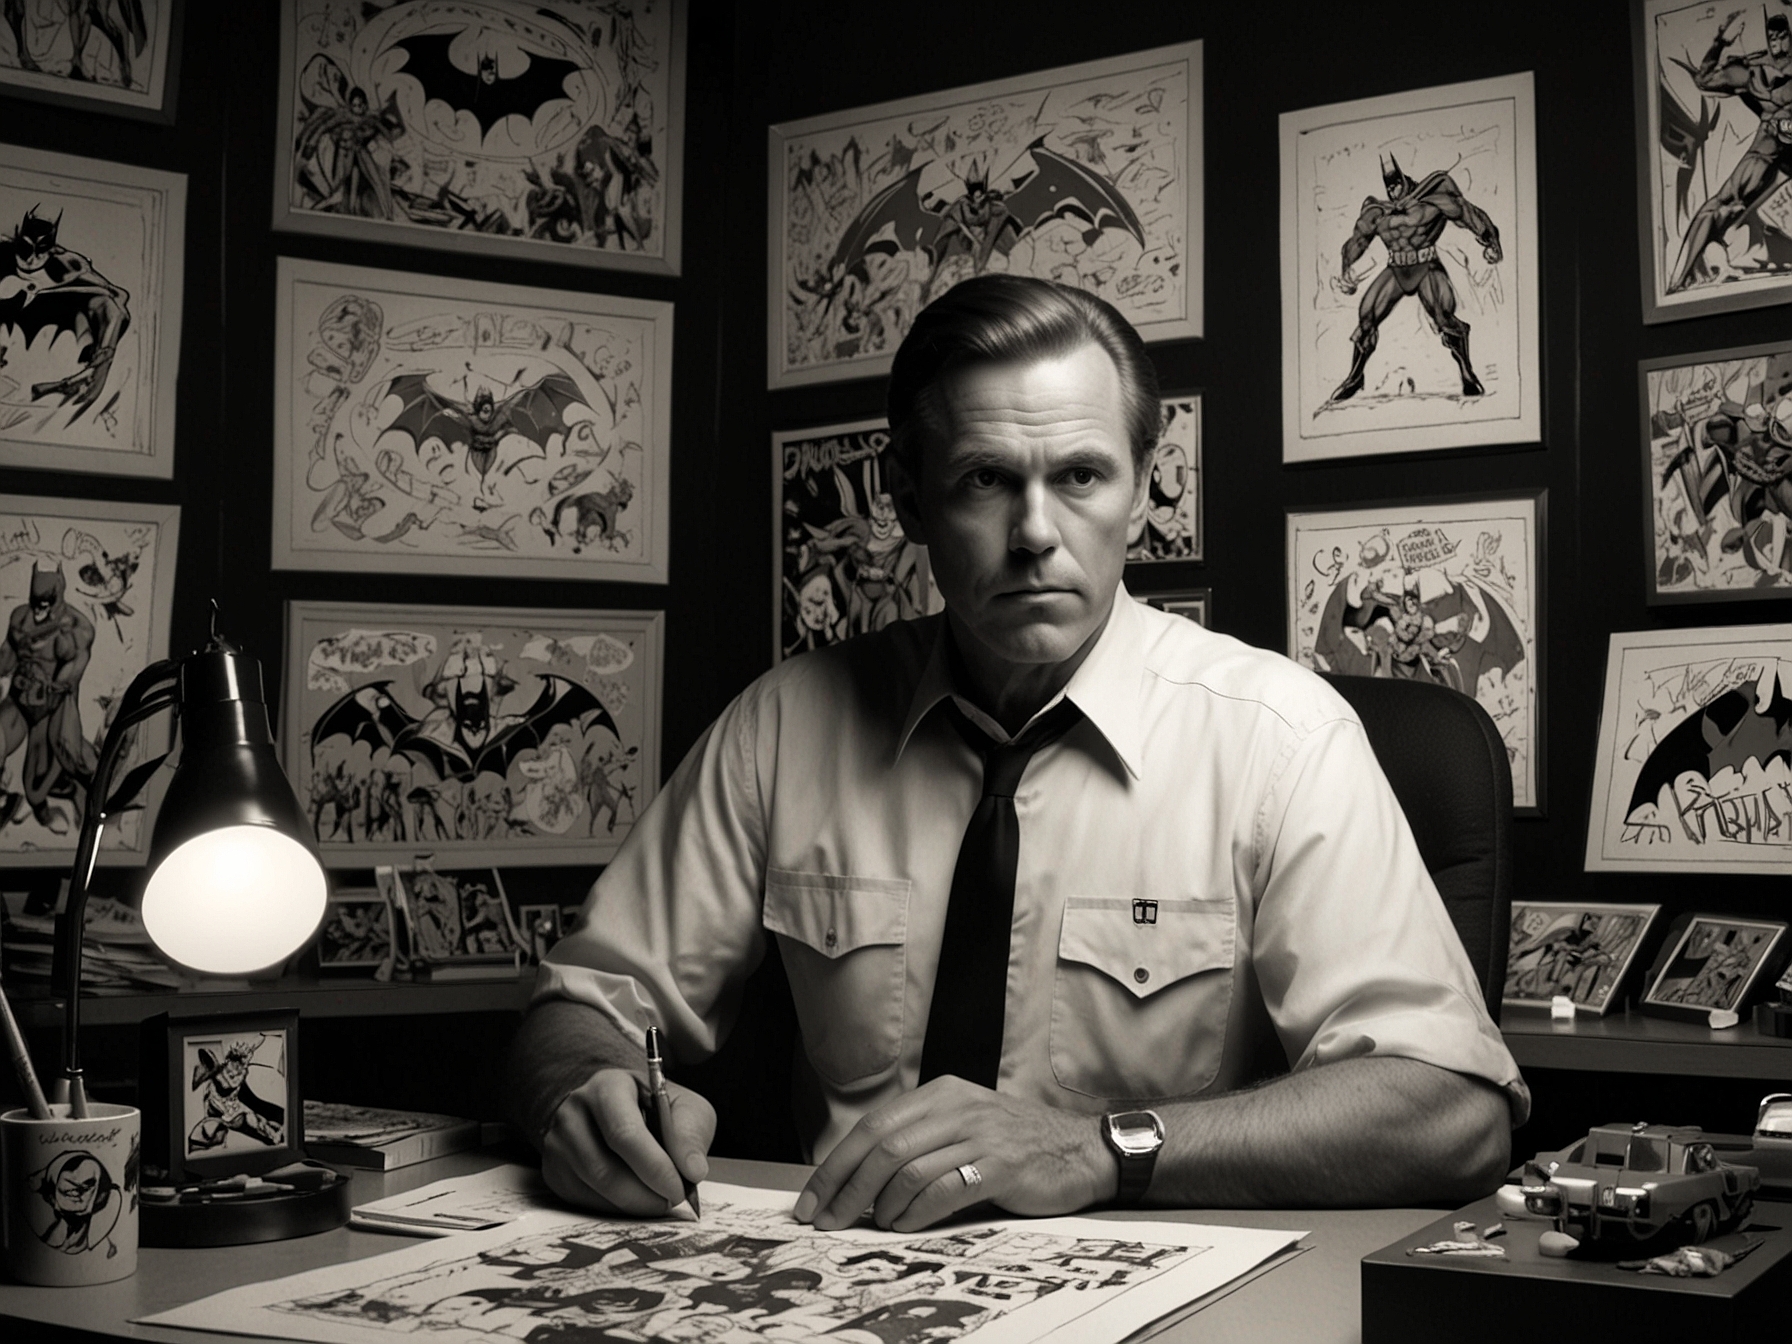 A striking image of Bruce Timm at his animation desk, surrounded by Batman artwork and memorabilia, highlighting his instrumental role in the creation of Batman: Caped Crusader.